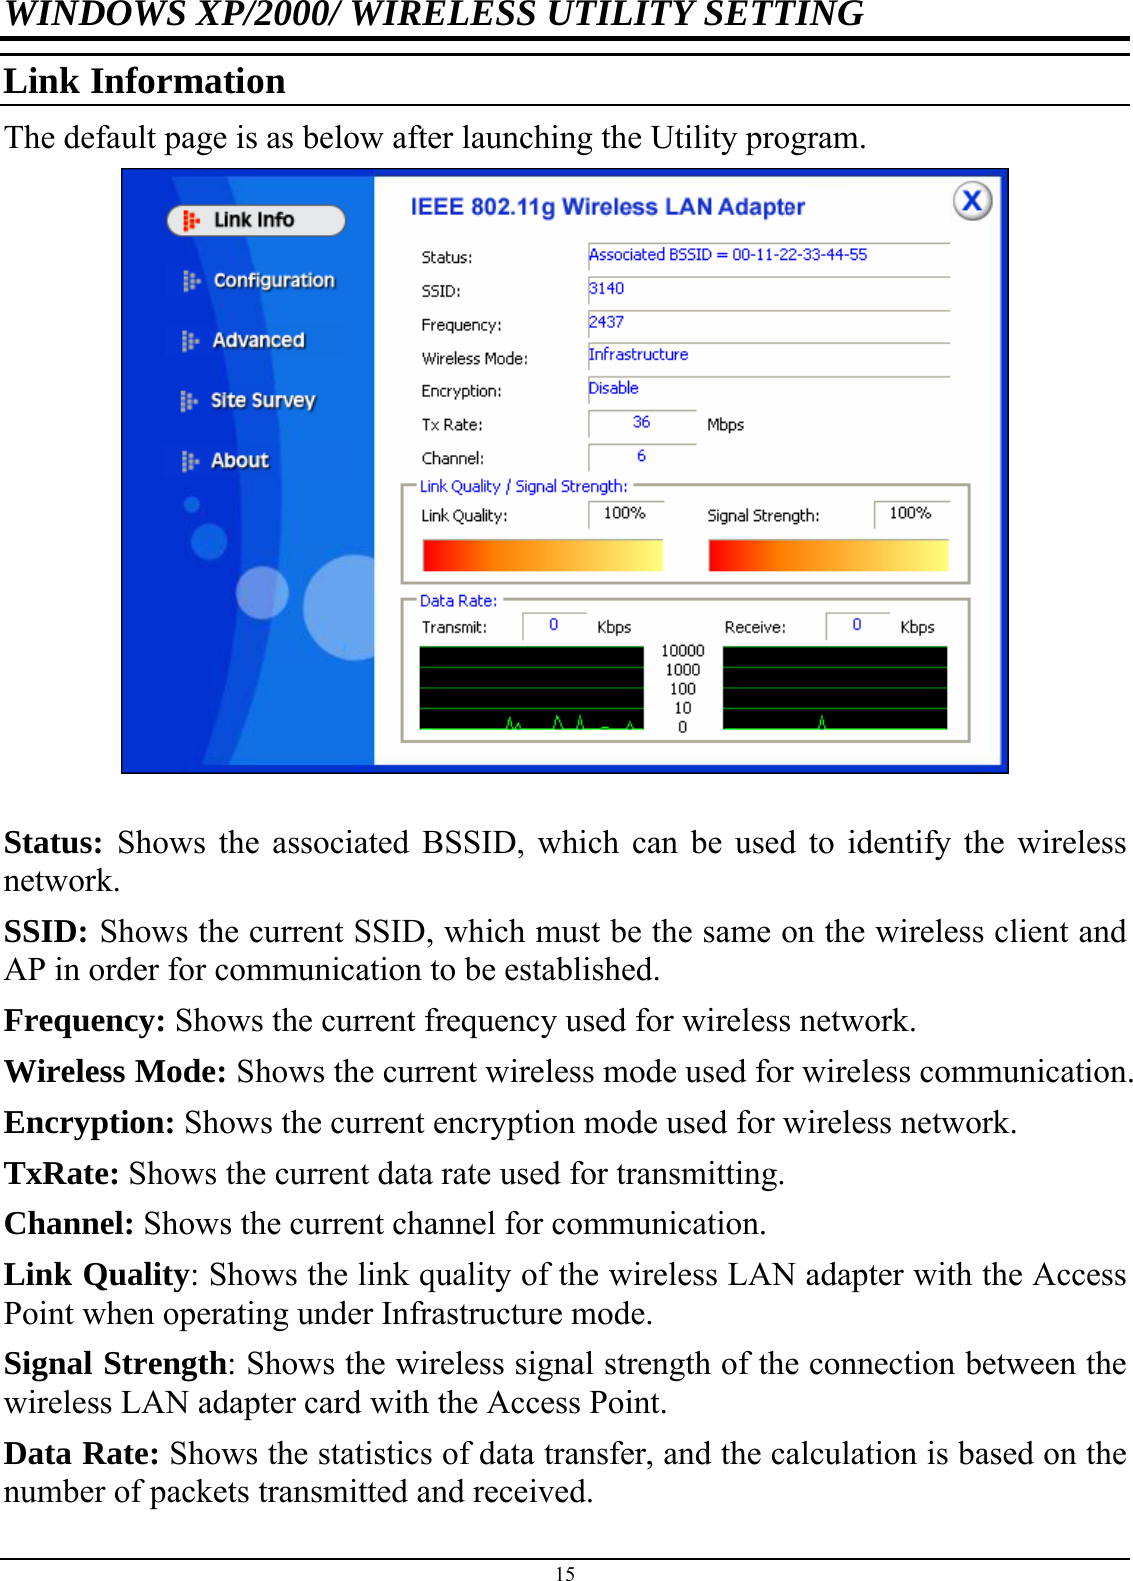 WINDOWS XP/2000/ WIRELESS UTILITY SETTING Link Information The default page is as below after launching the Utility program.   Status: Shows the associated BSSID, which can be used to identify the wireless network. SSID: Shows the current SSID, which must be the same on the wireless client and AP in order for communication to be established. Frequency: Shows the current frequency used for wireless network. Wireless Mode: Shows the current wireless mode used for wireless communication. Encryption: Shows the current encryption mode used for wireless network. TxRate: Shows the current data rate used for transmitting. Channel: Shows the current channel for communication. Link Quality: Shows the link quality of the wireless LAN adapter with the Access Point when operating under Infrastructure mode. Signal Strength: Shows the wireless signal strength of the connection between the wireless LAN adapter card with the Access Point. Data Rate: Shows the statistics of data transfer, and the calculation is based on the number of packets transmitted and received. 15 